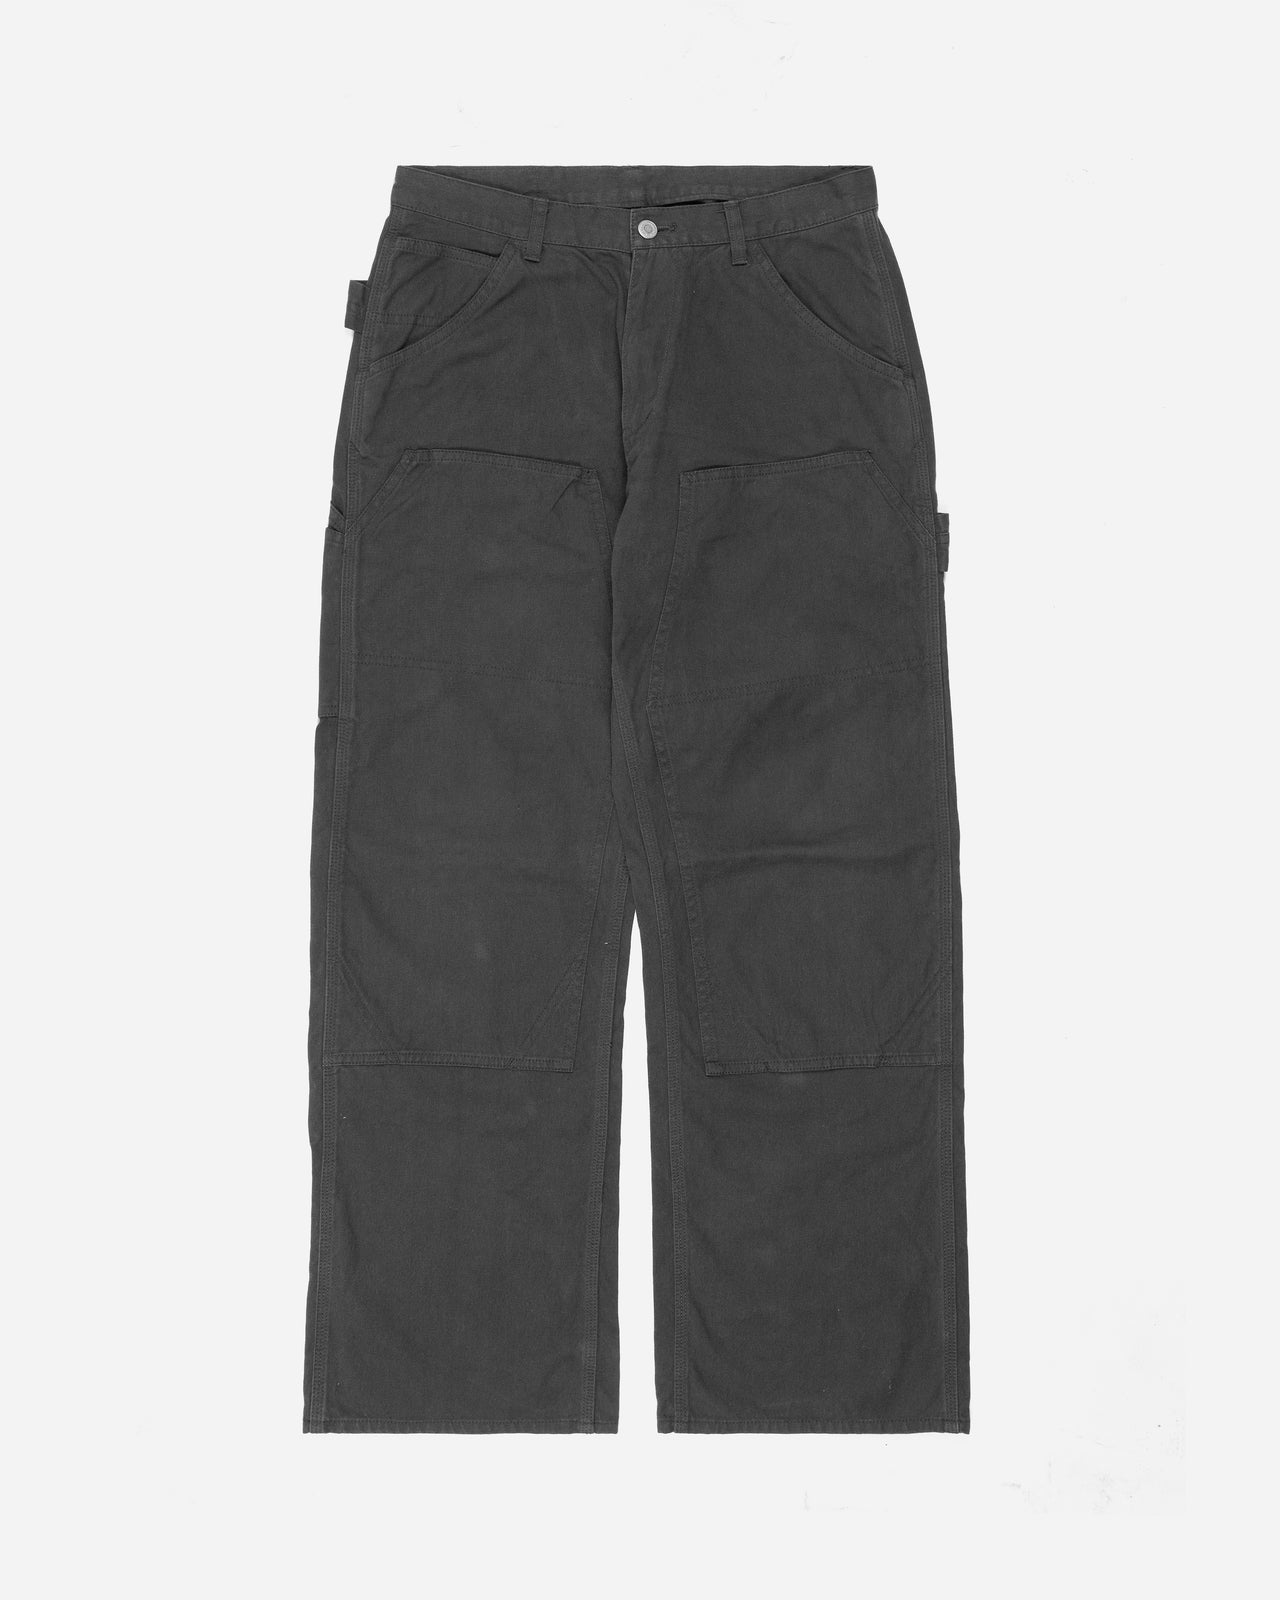 General Research Carbon Grey Double Knee Painters Pant - AW01